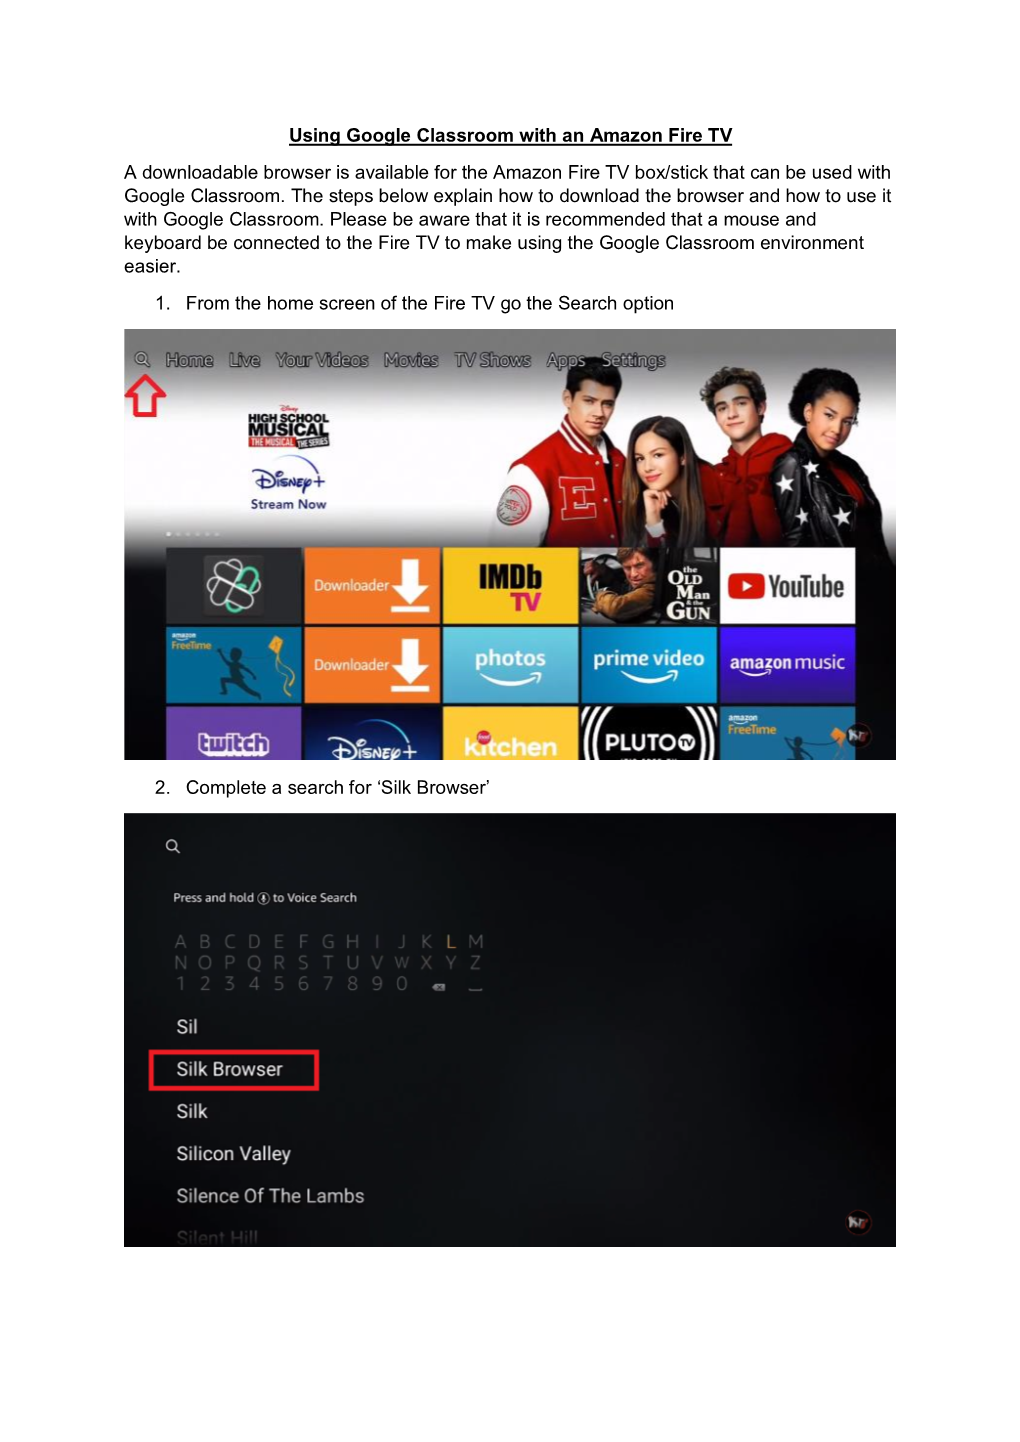 Using Google Classroom with an Amazon Fire TV a Downloadable Browser Is Available for the Amazon Fire TV Box/Stick That Can Be Used with Google Classroom